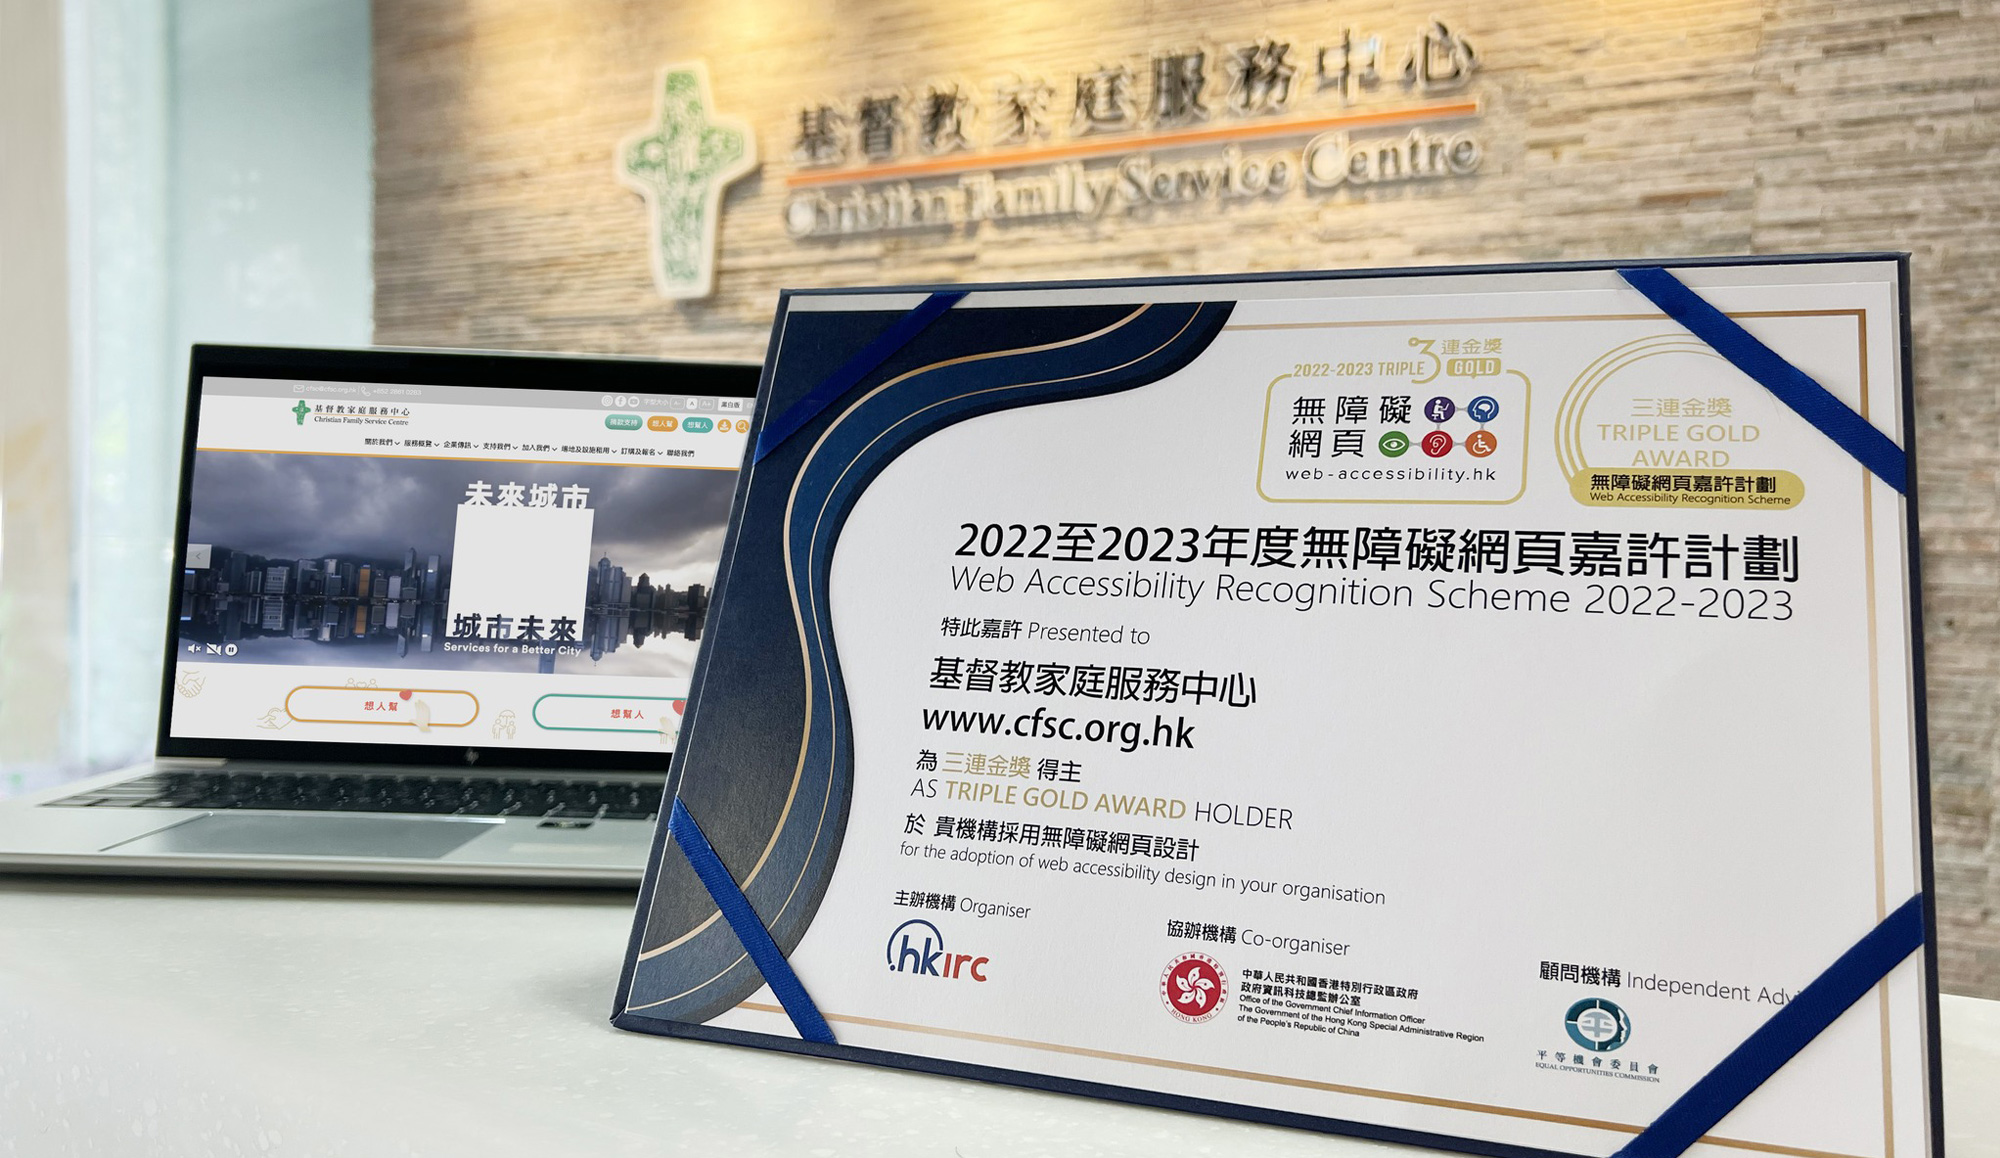 Cover Image - Web Accessibility Recognition Scheme 2022-2023 - Triple Gold Award